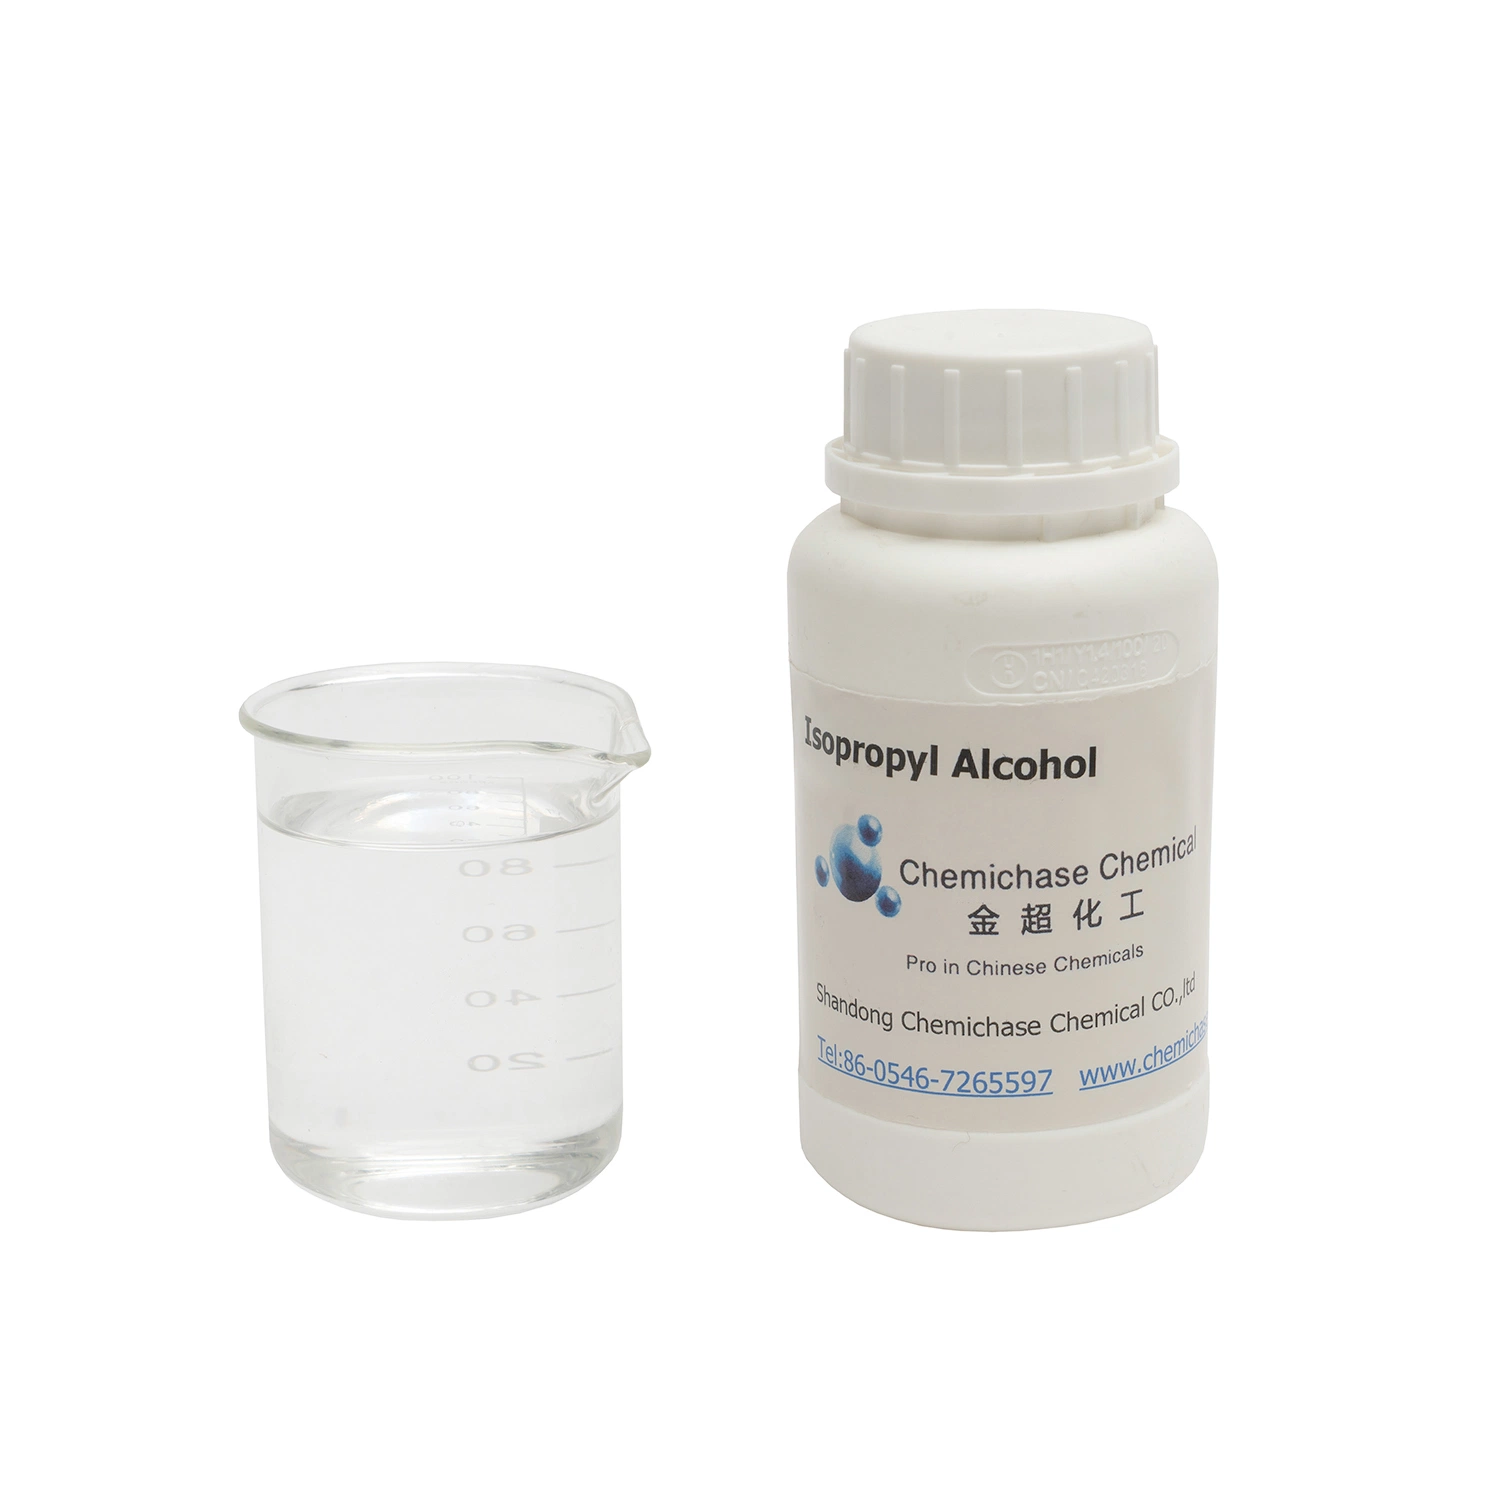 Hot Sale Isopropyl Alcohol Ipa Drum IBC ISO Low Price Good quality Chinese Material Chemistry Chemical Product